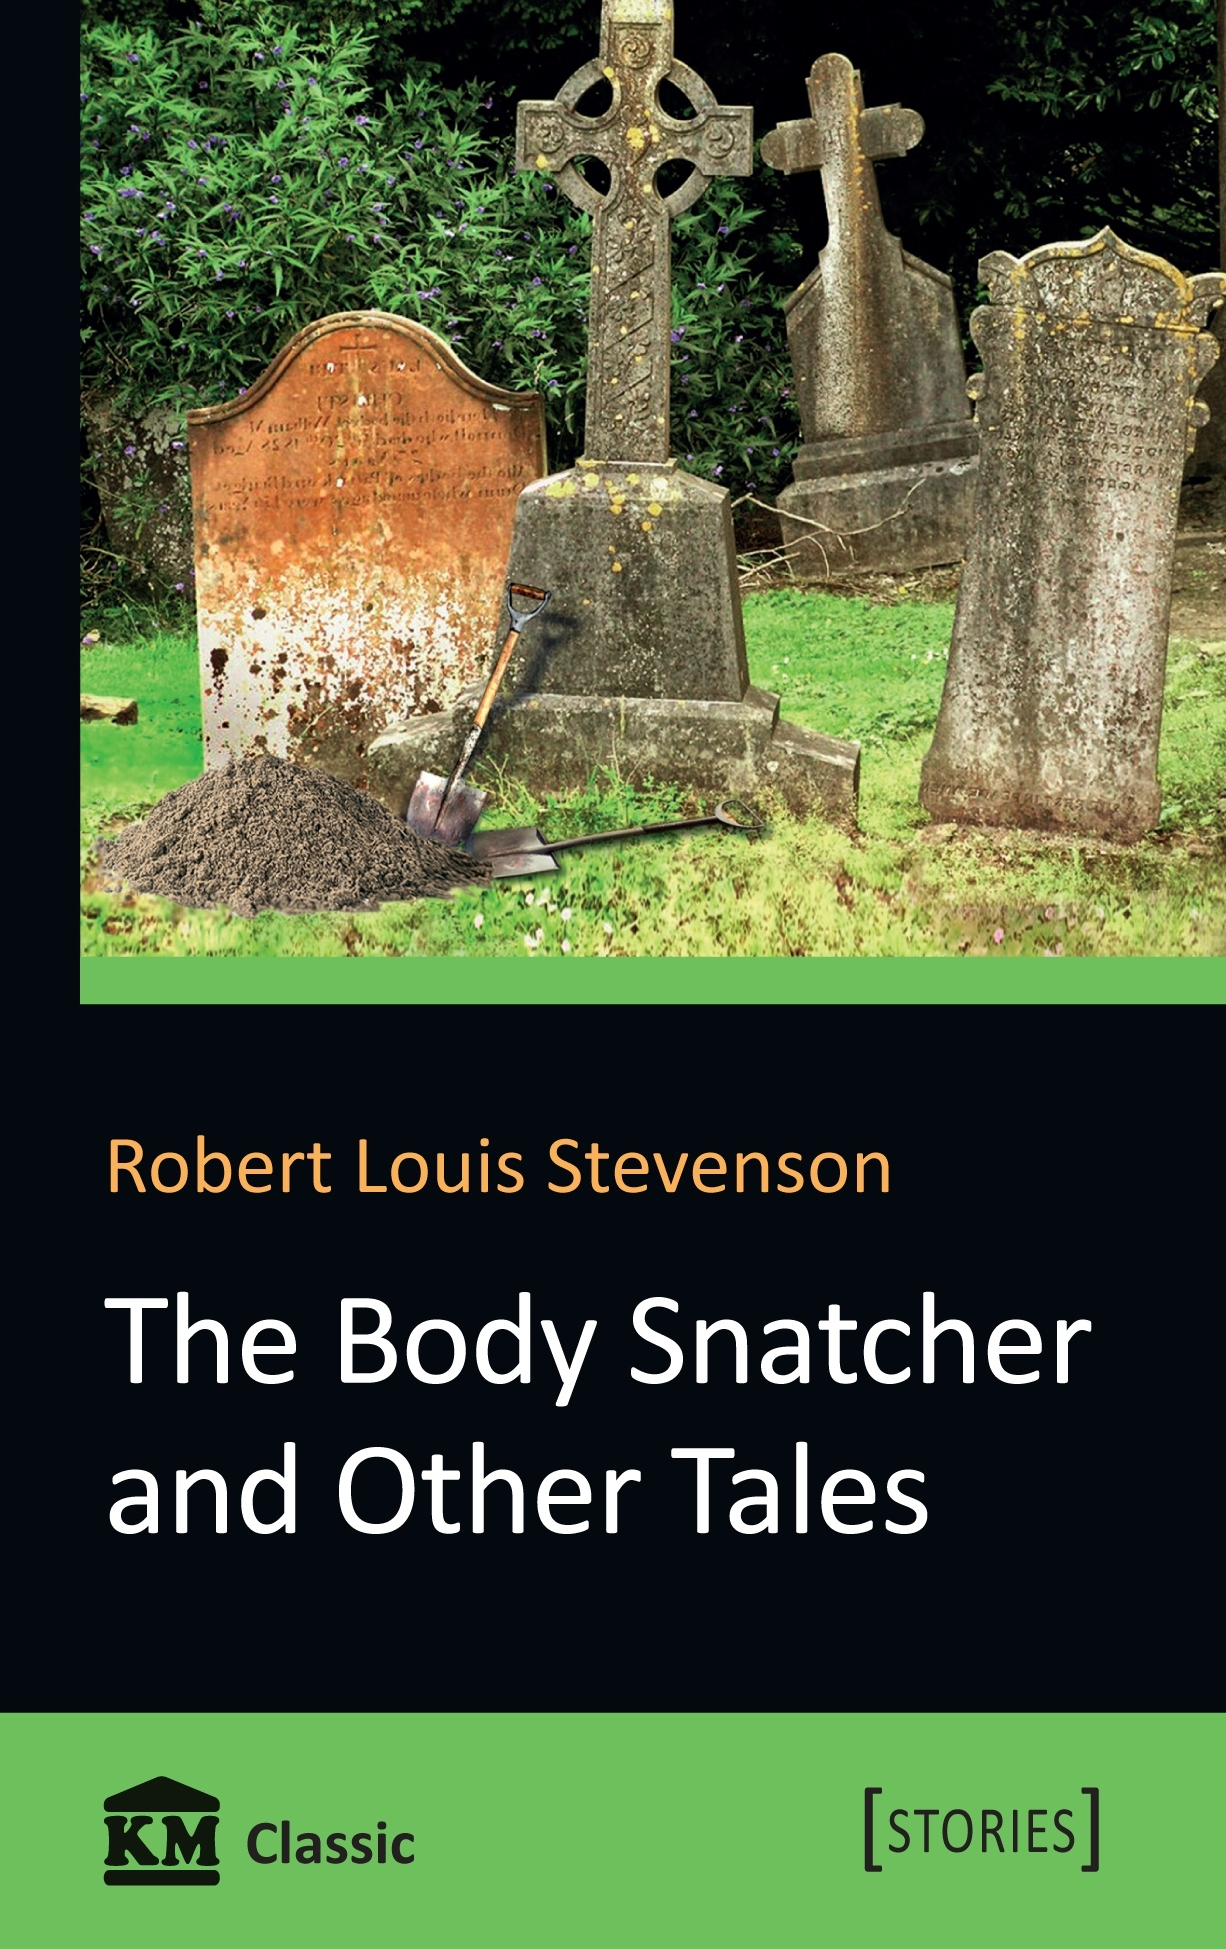 The Body Snatcher and Other Tales